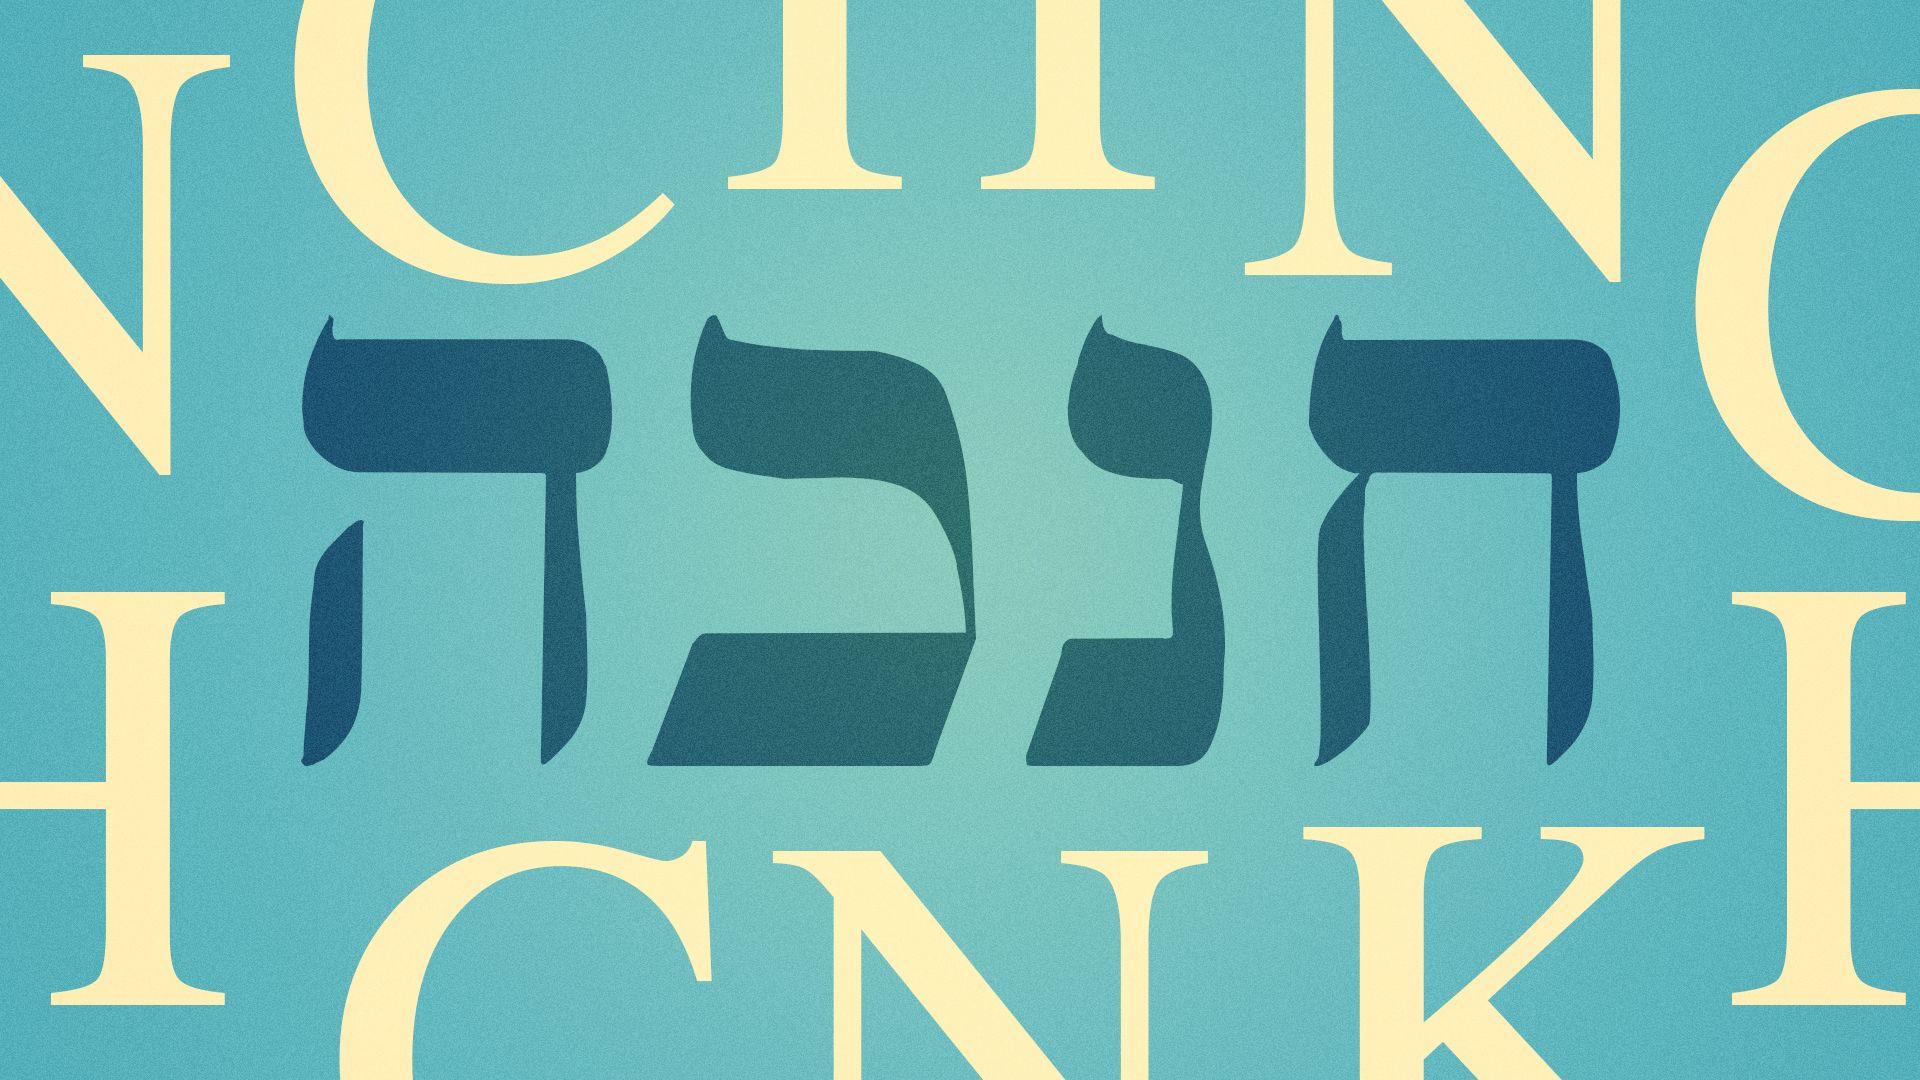 Illustration of the Hebrew word for "Hannukah" surrounded by H's, N's, K's, and C's.